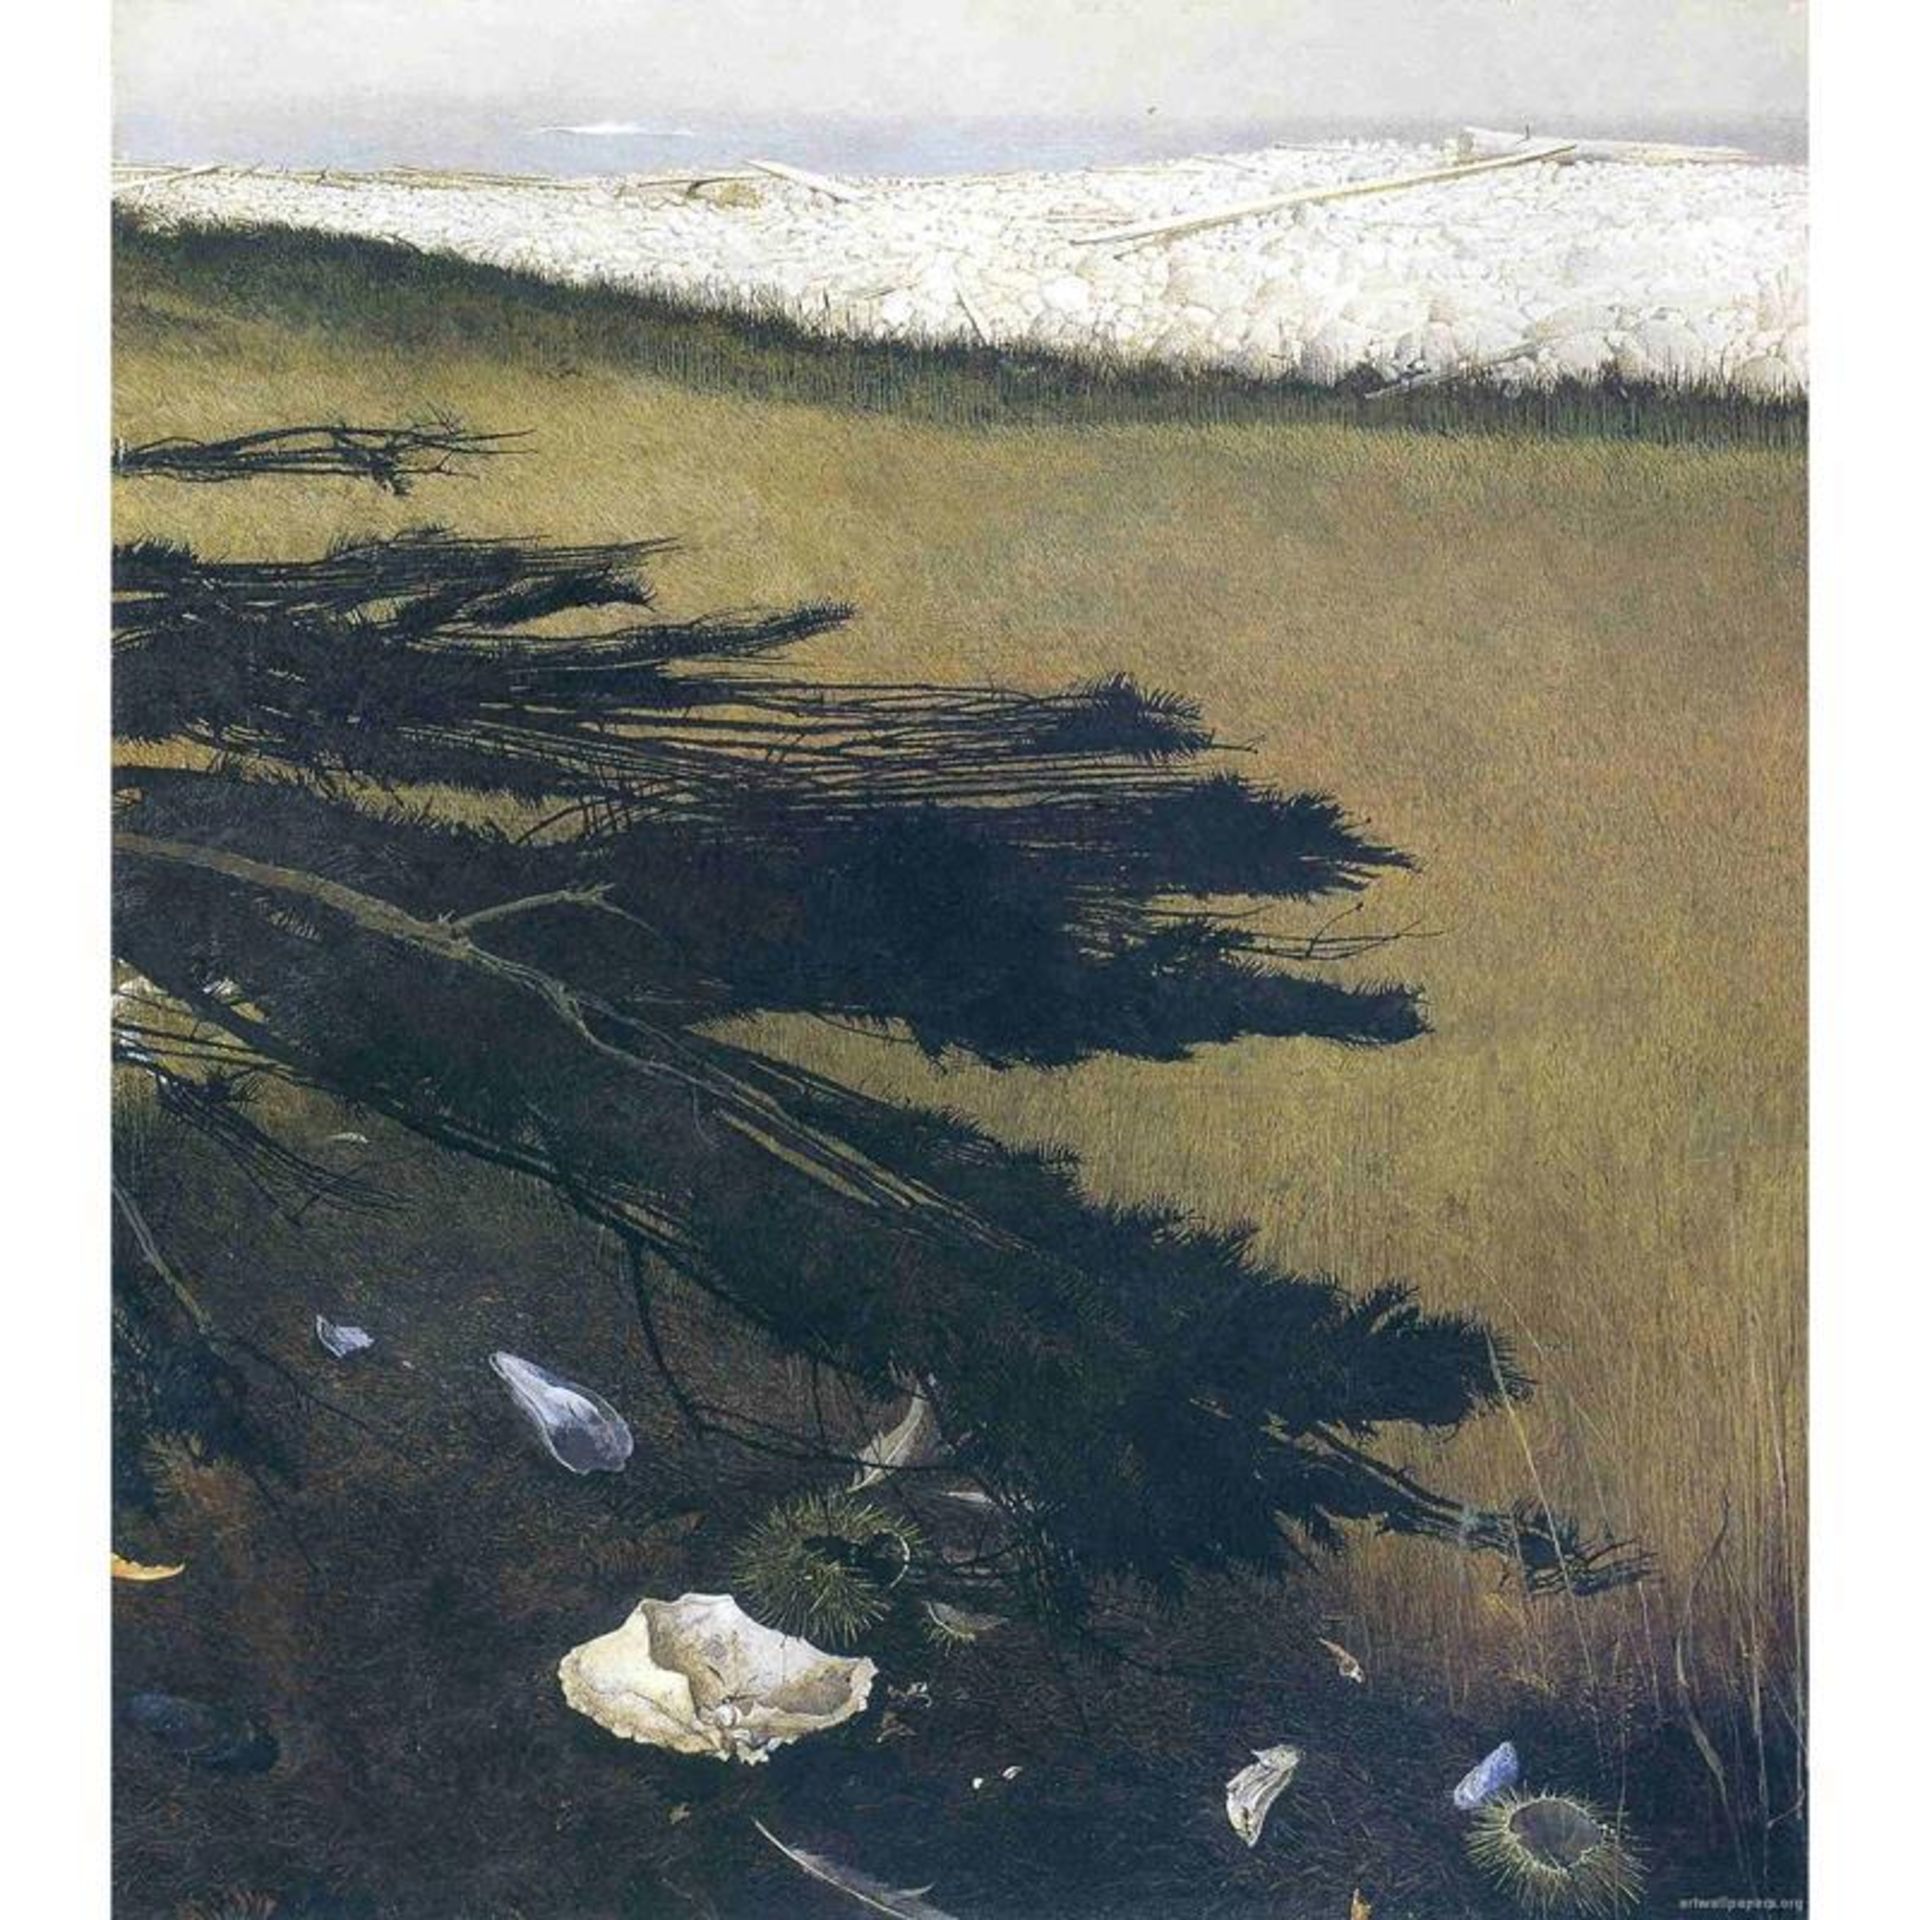 Andrew Wyeth "Ravens Grove, 1985" Offset Lithograph